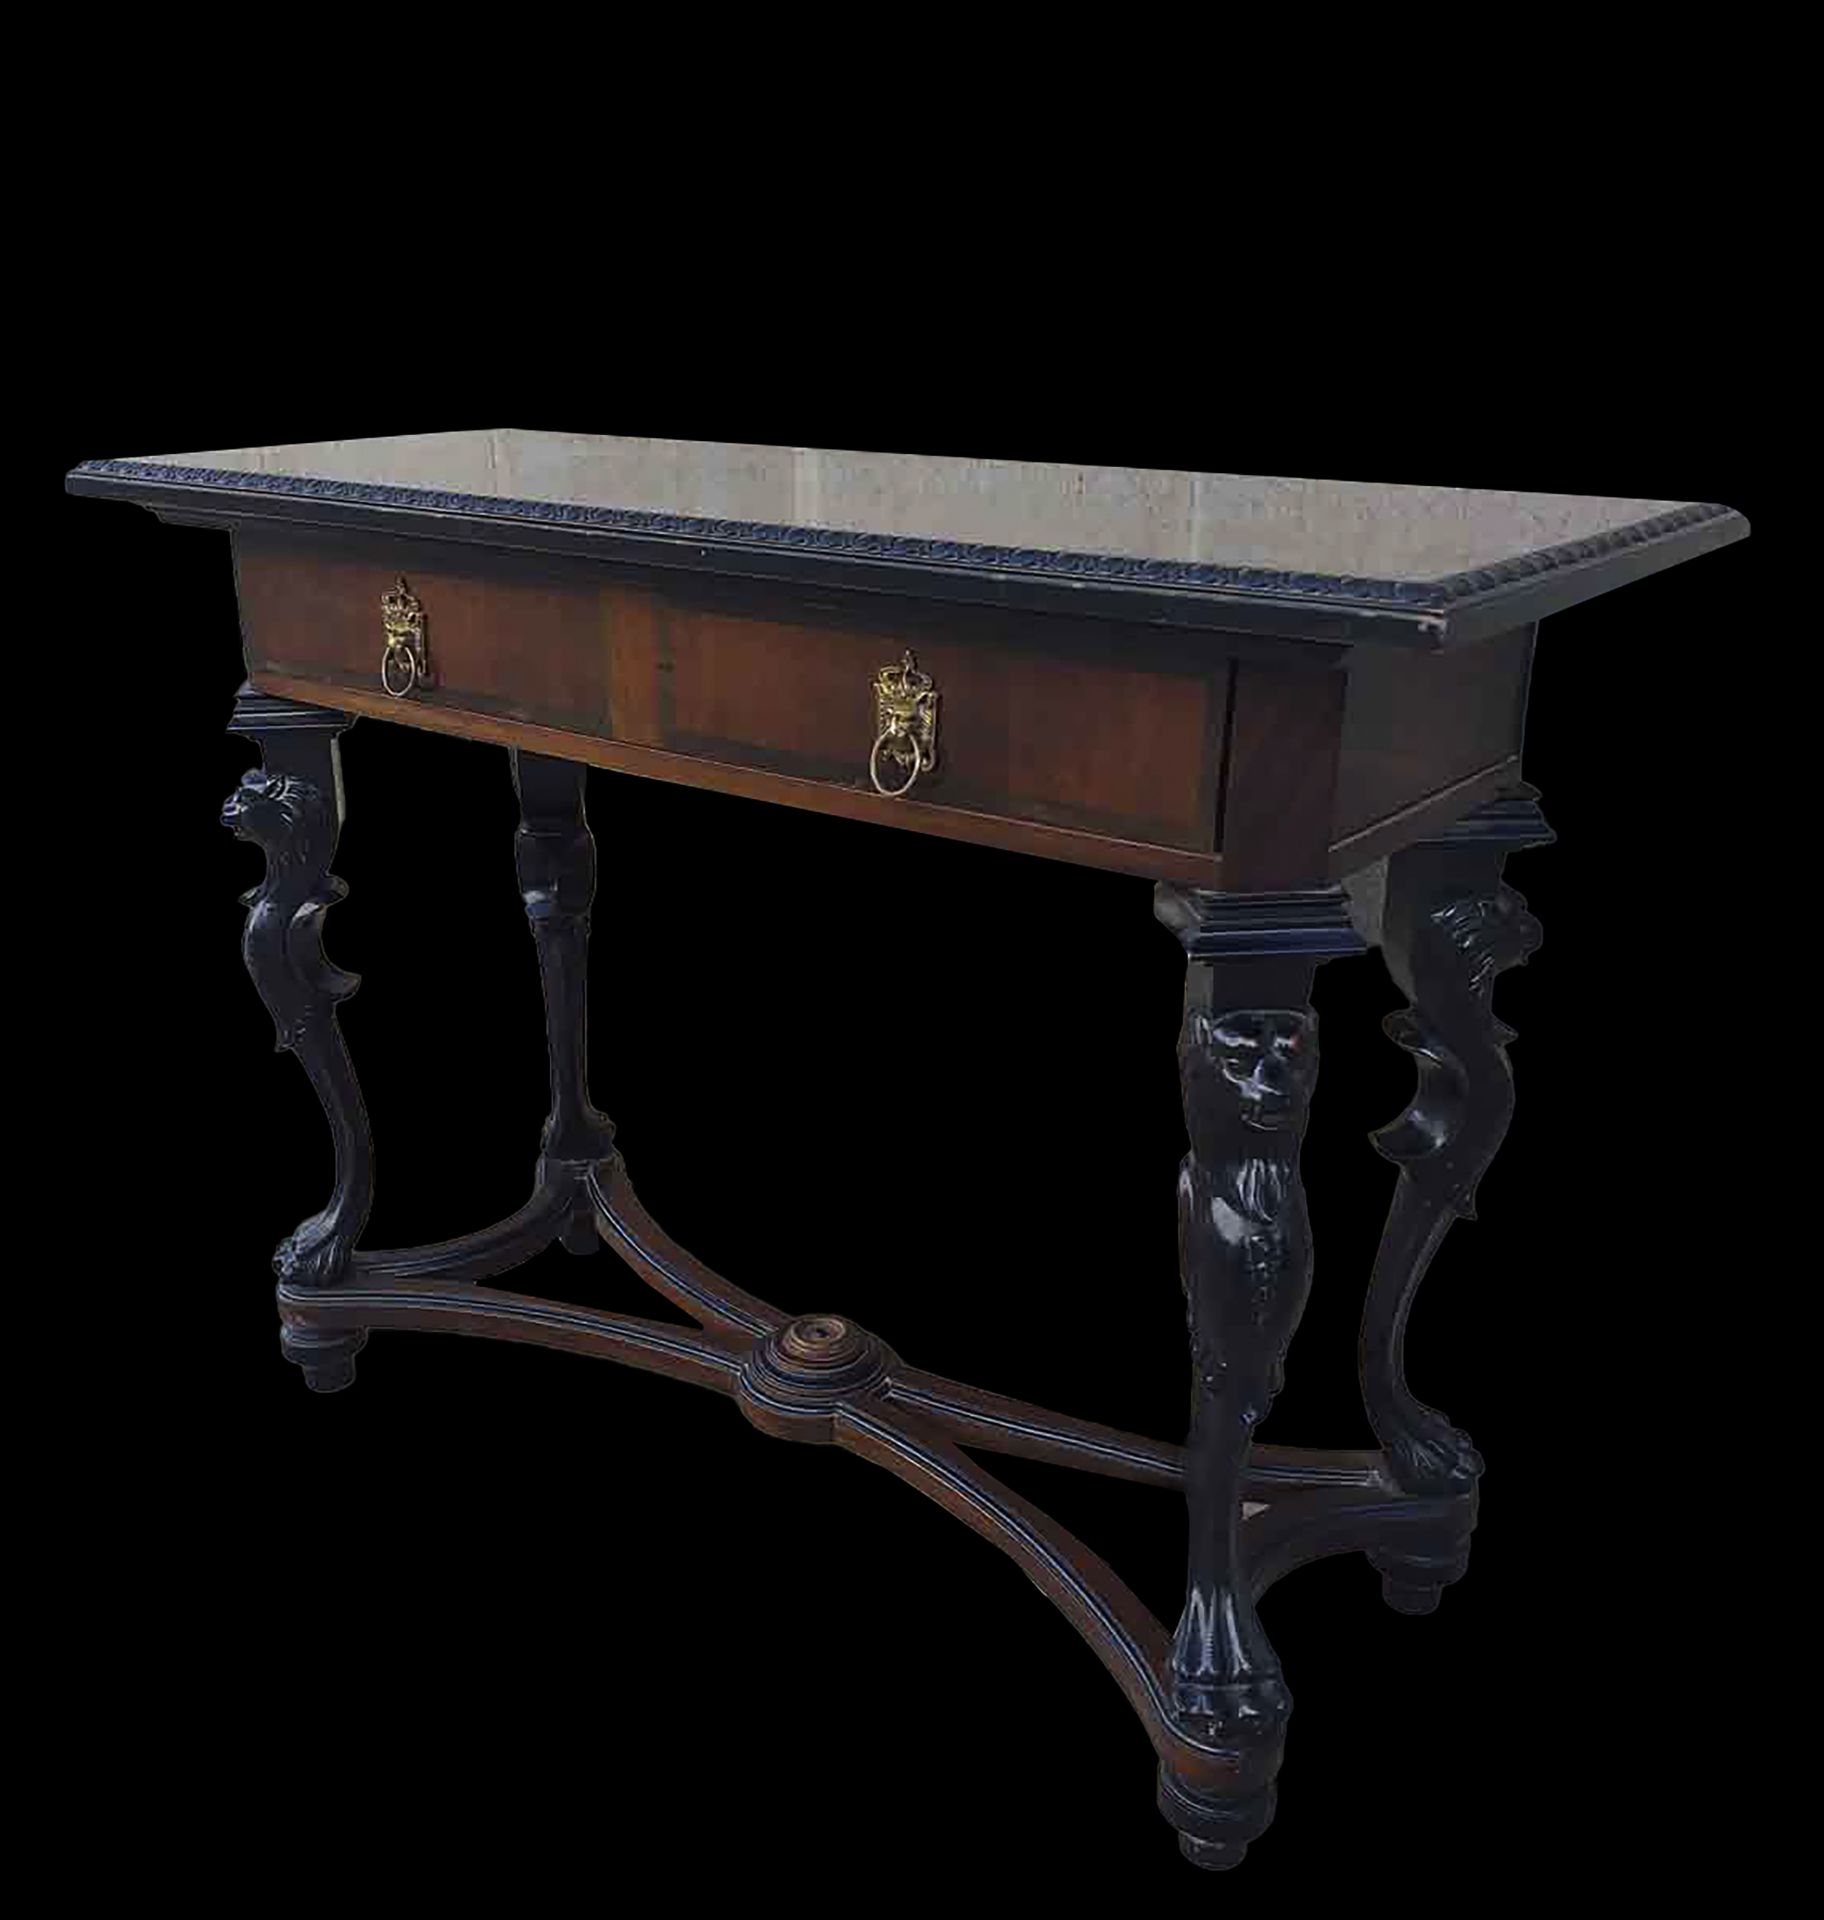 Console in rosewood and ebony marquetry enters Chippendale style, 19th century English Victorian wor - Image 3 of 5